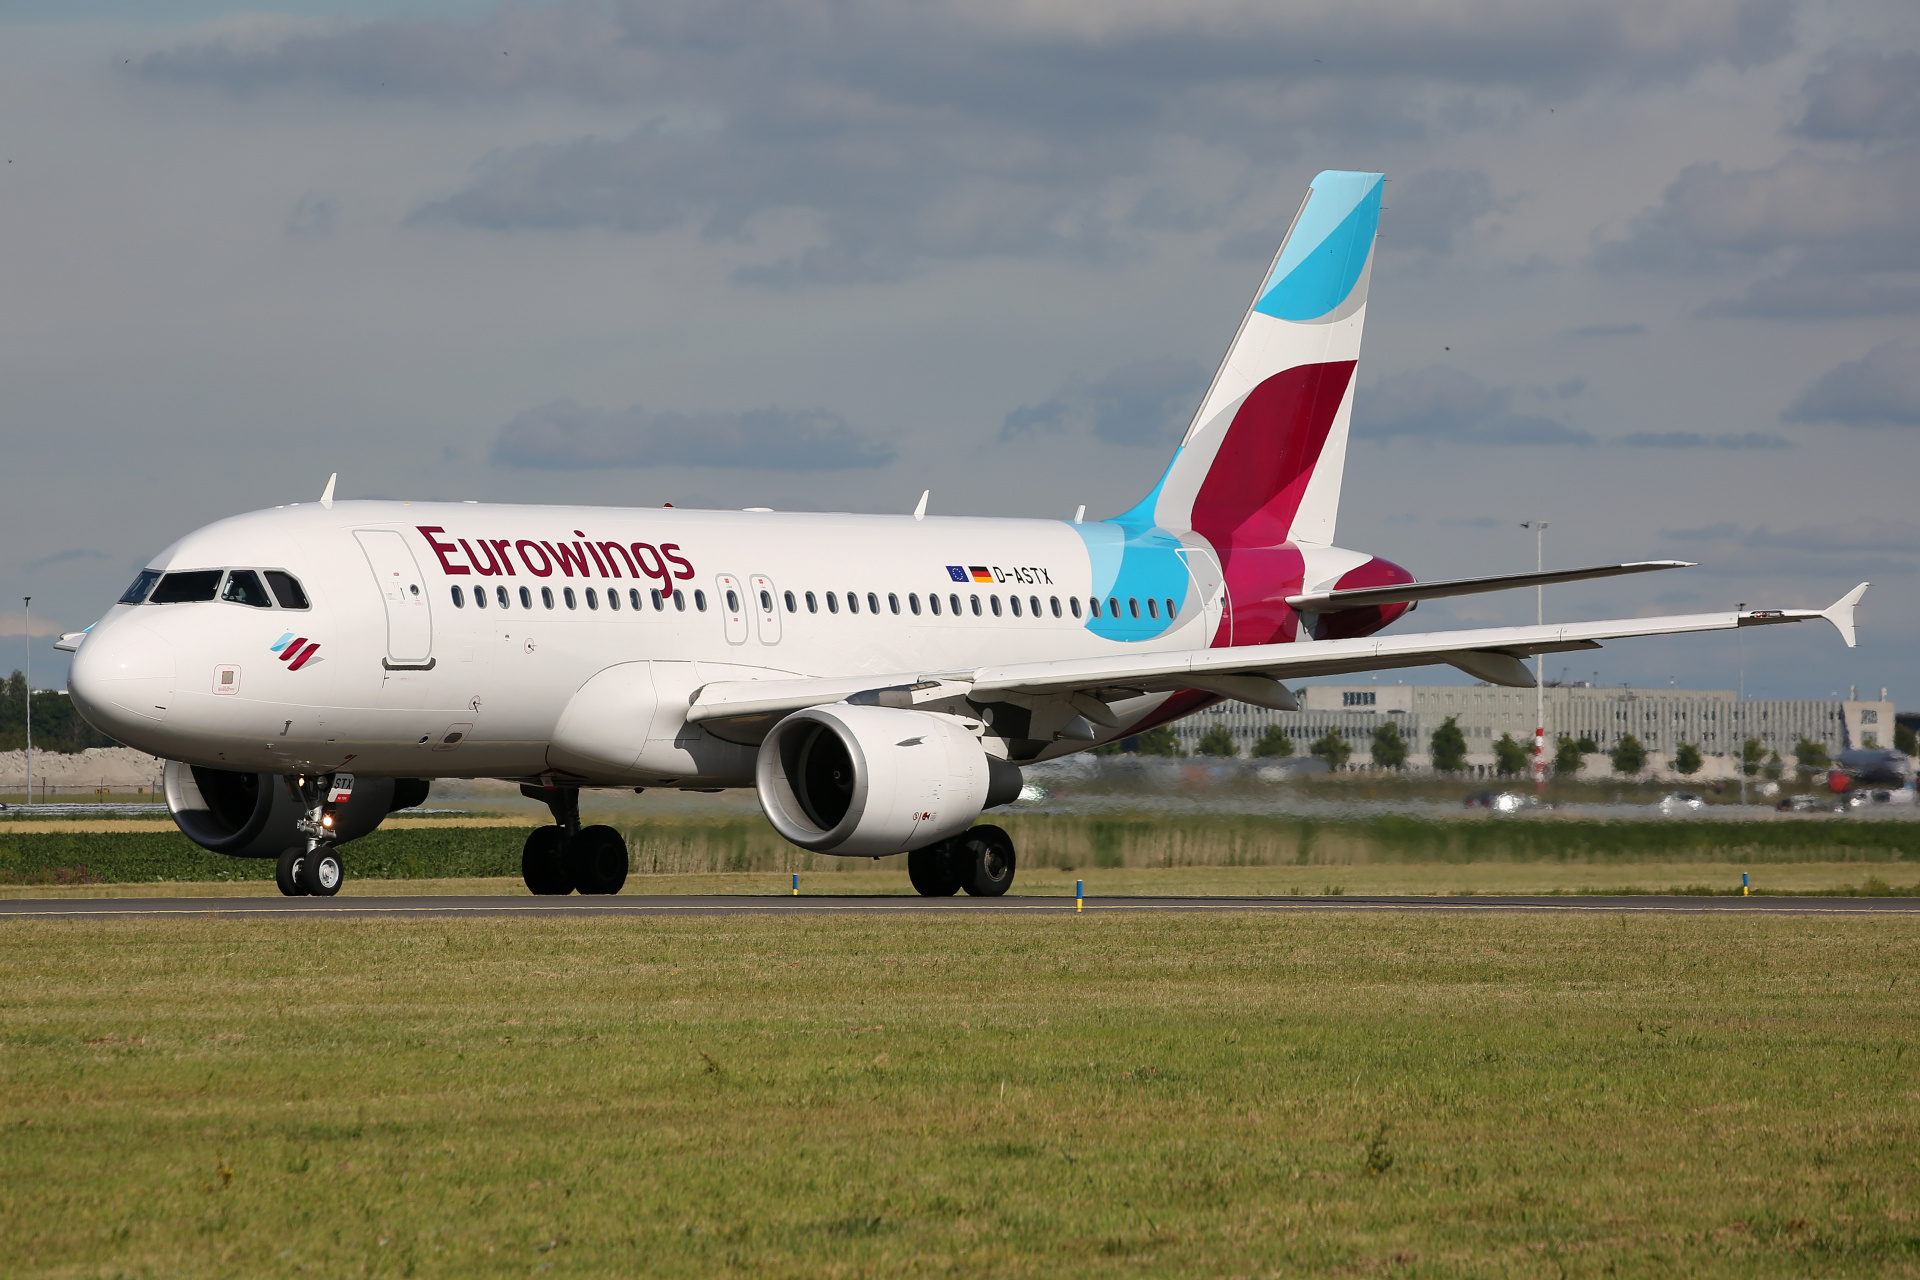 D-ASTX, Eurowings (Aircraft » Schiphol Spotting » Airbus A319-100)